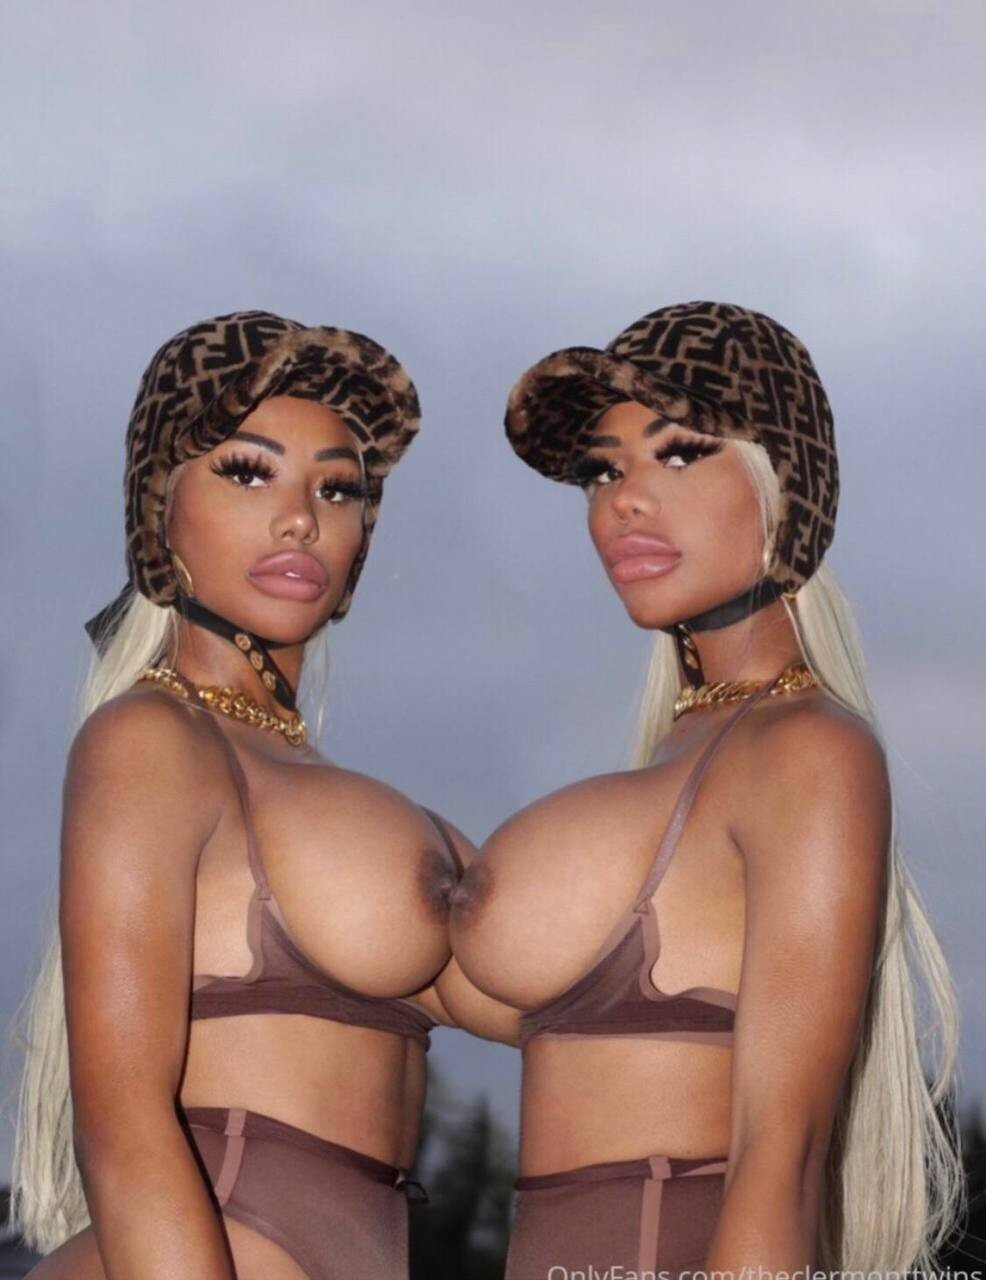 Clermont Twins Nudes - 59 photos